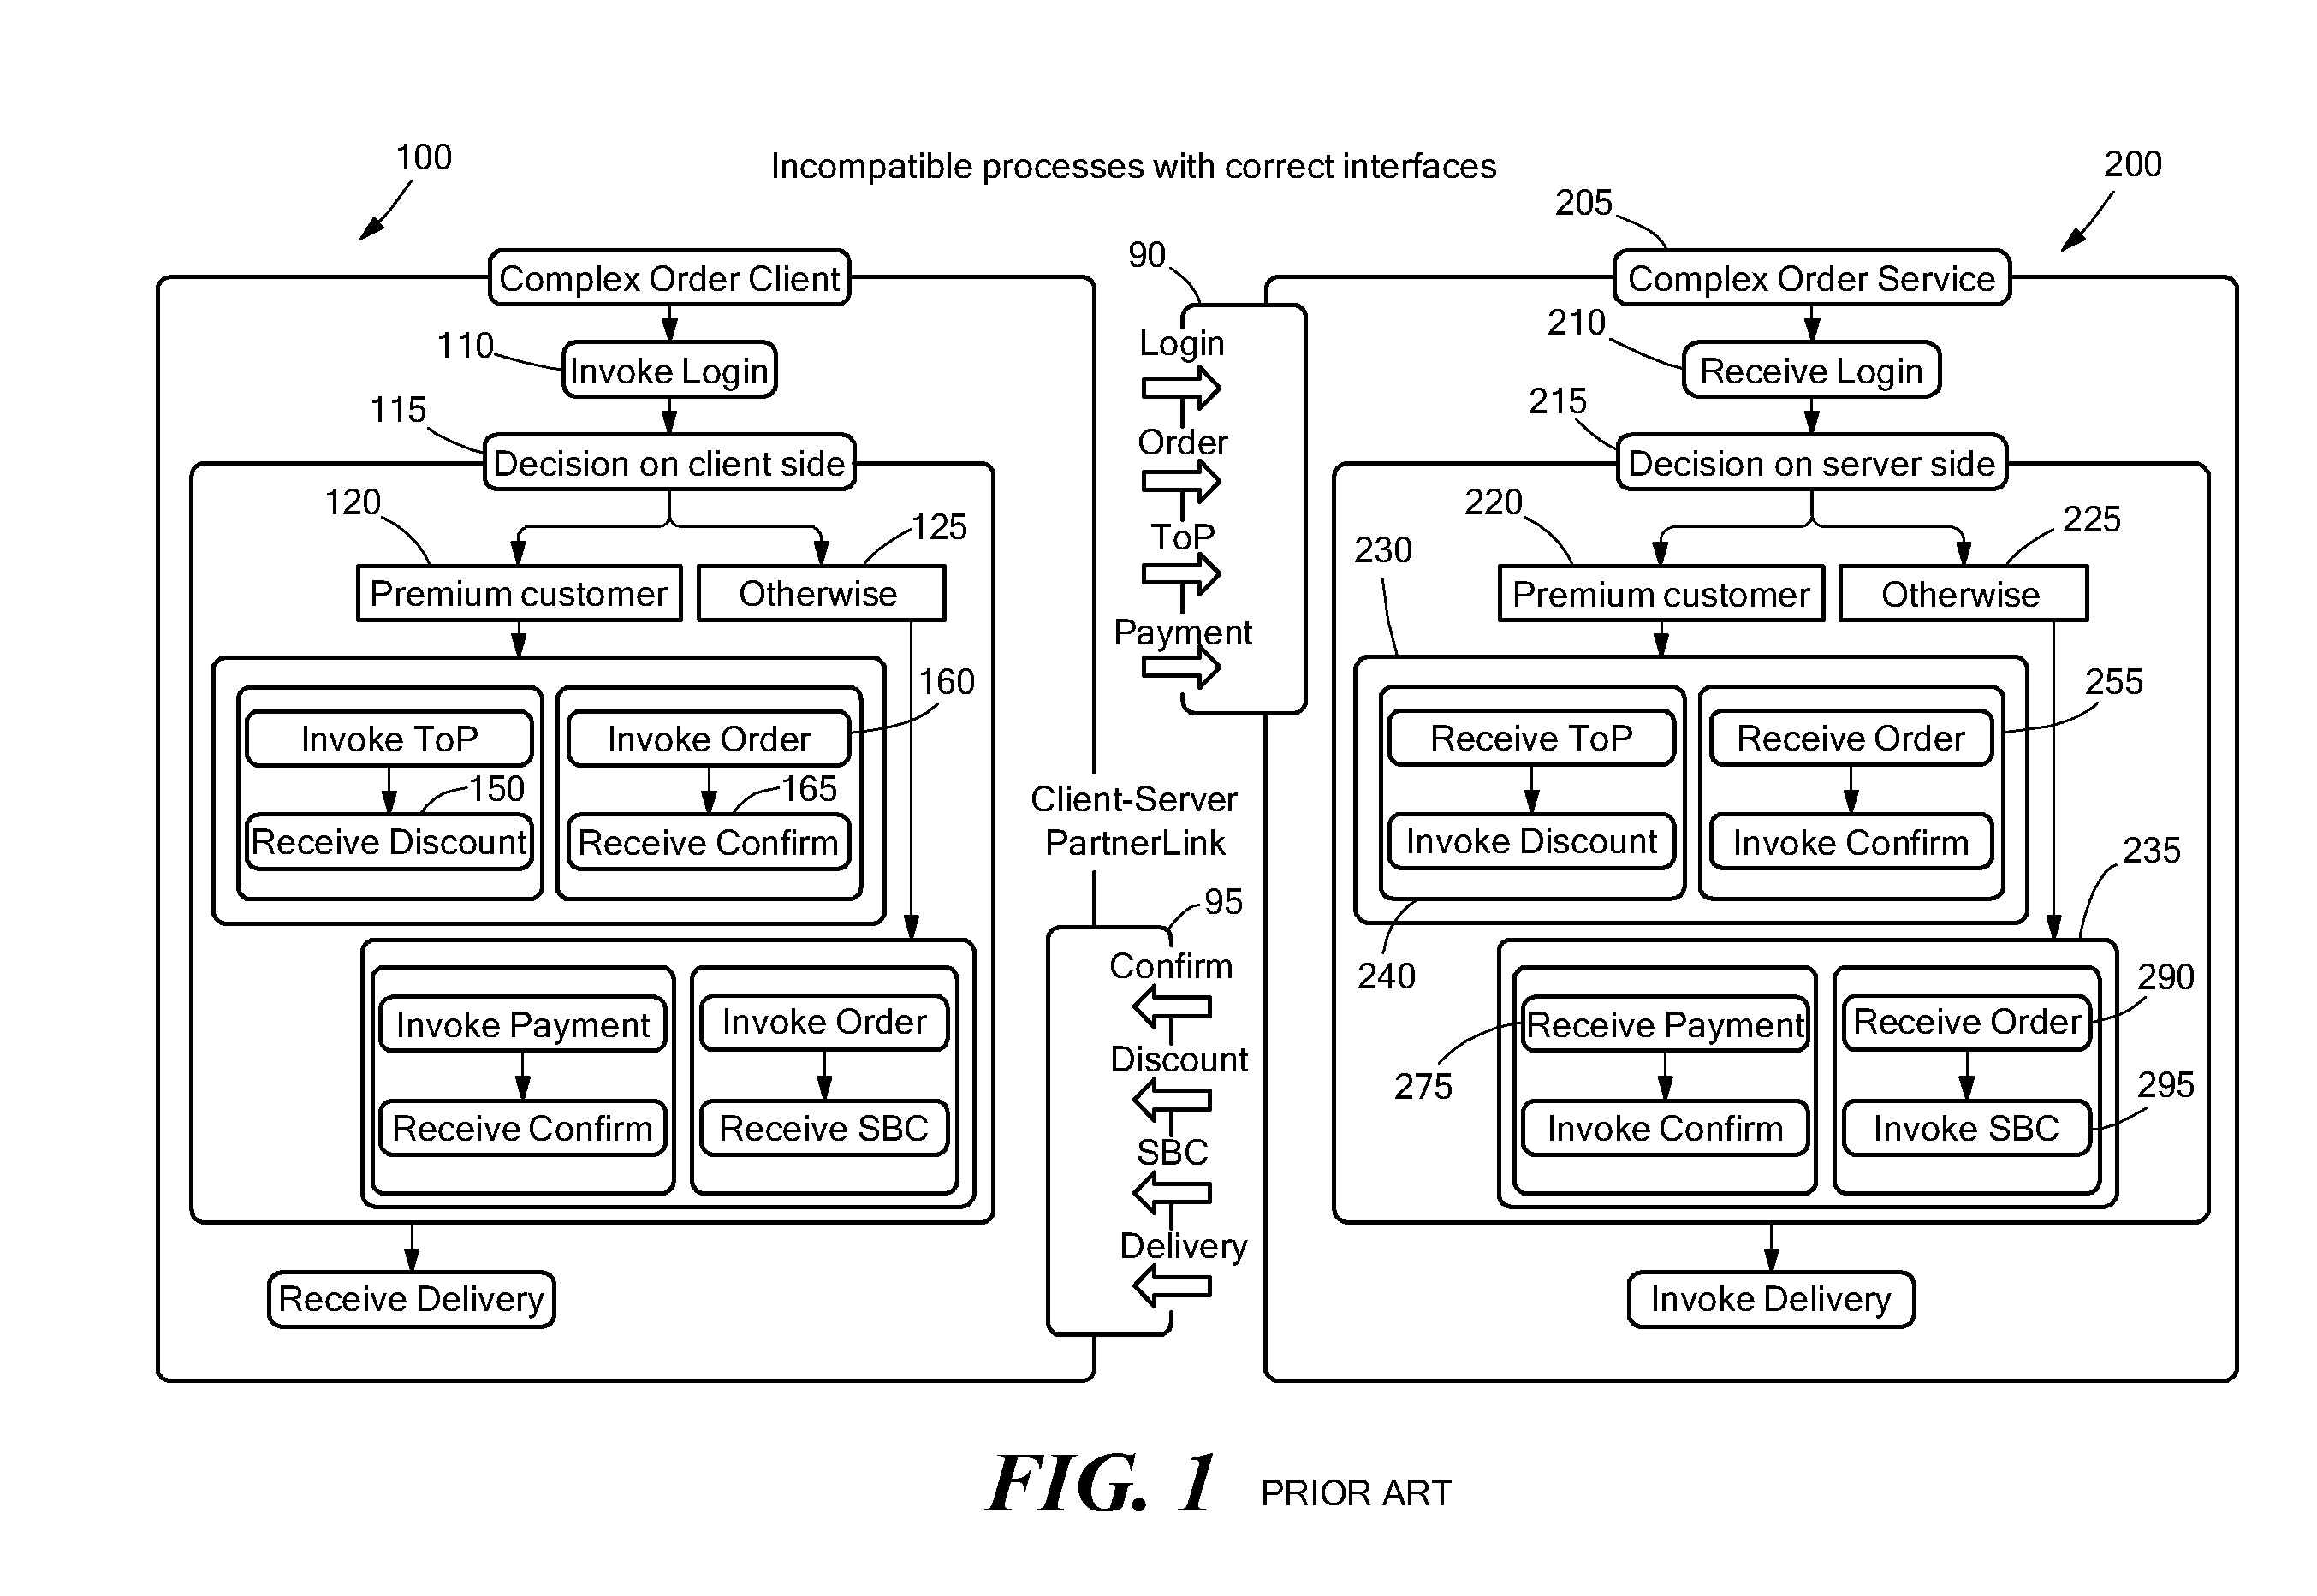 Method for generating compatible partner processes in BPEL